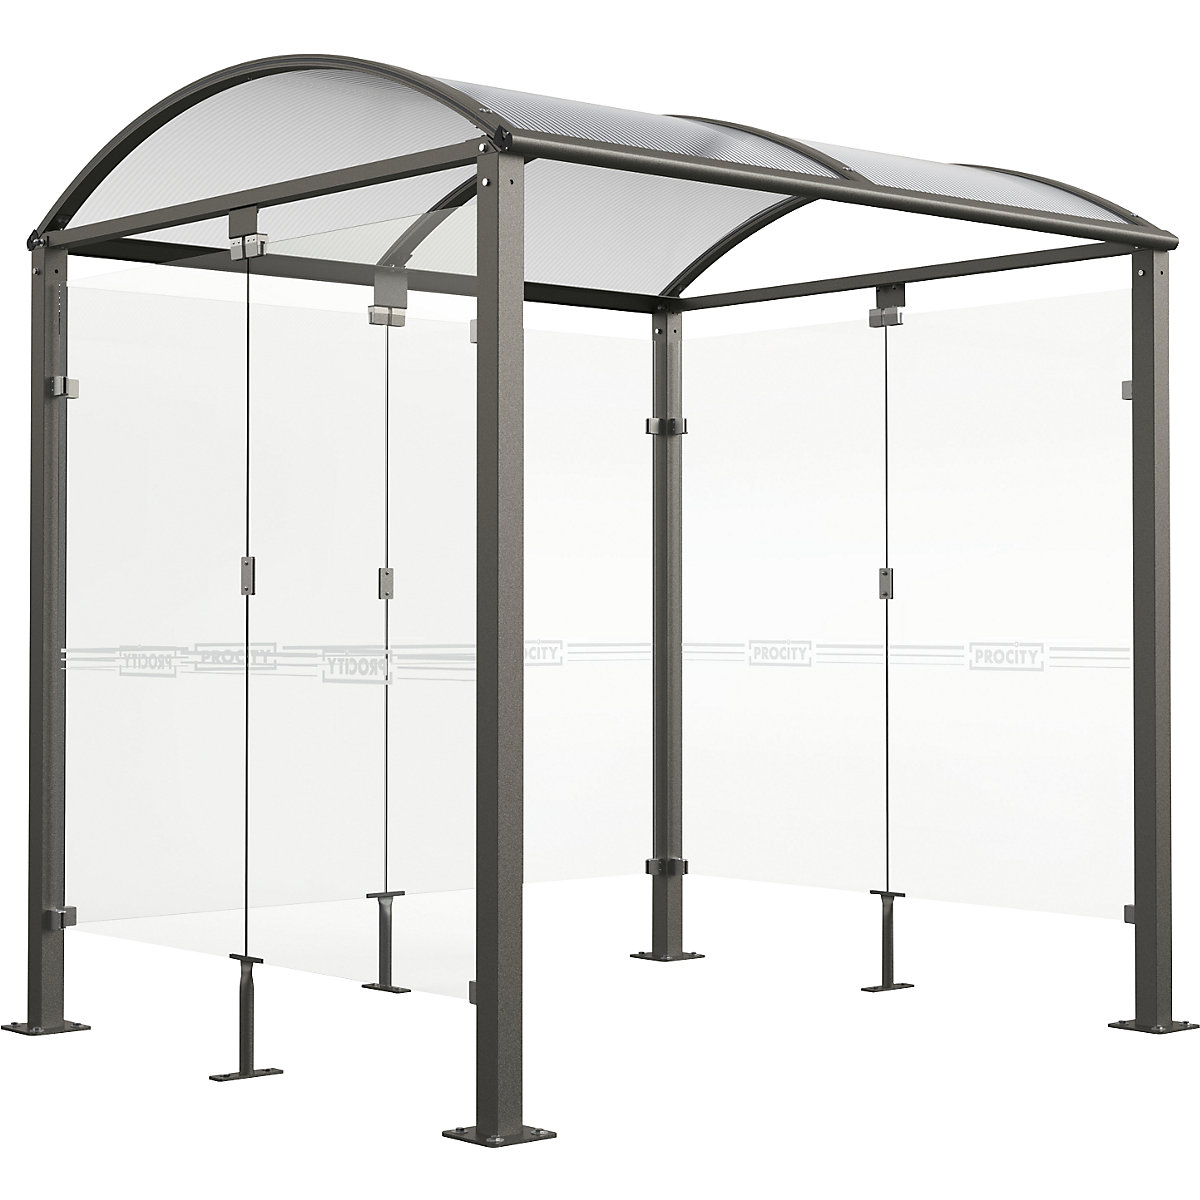 Bicycle shelter with glass - PROCITY